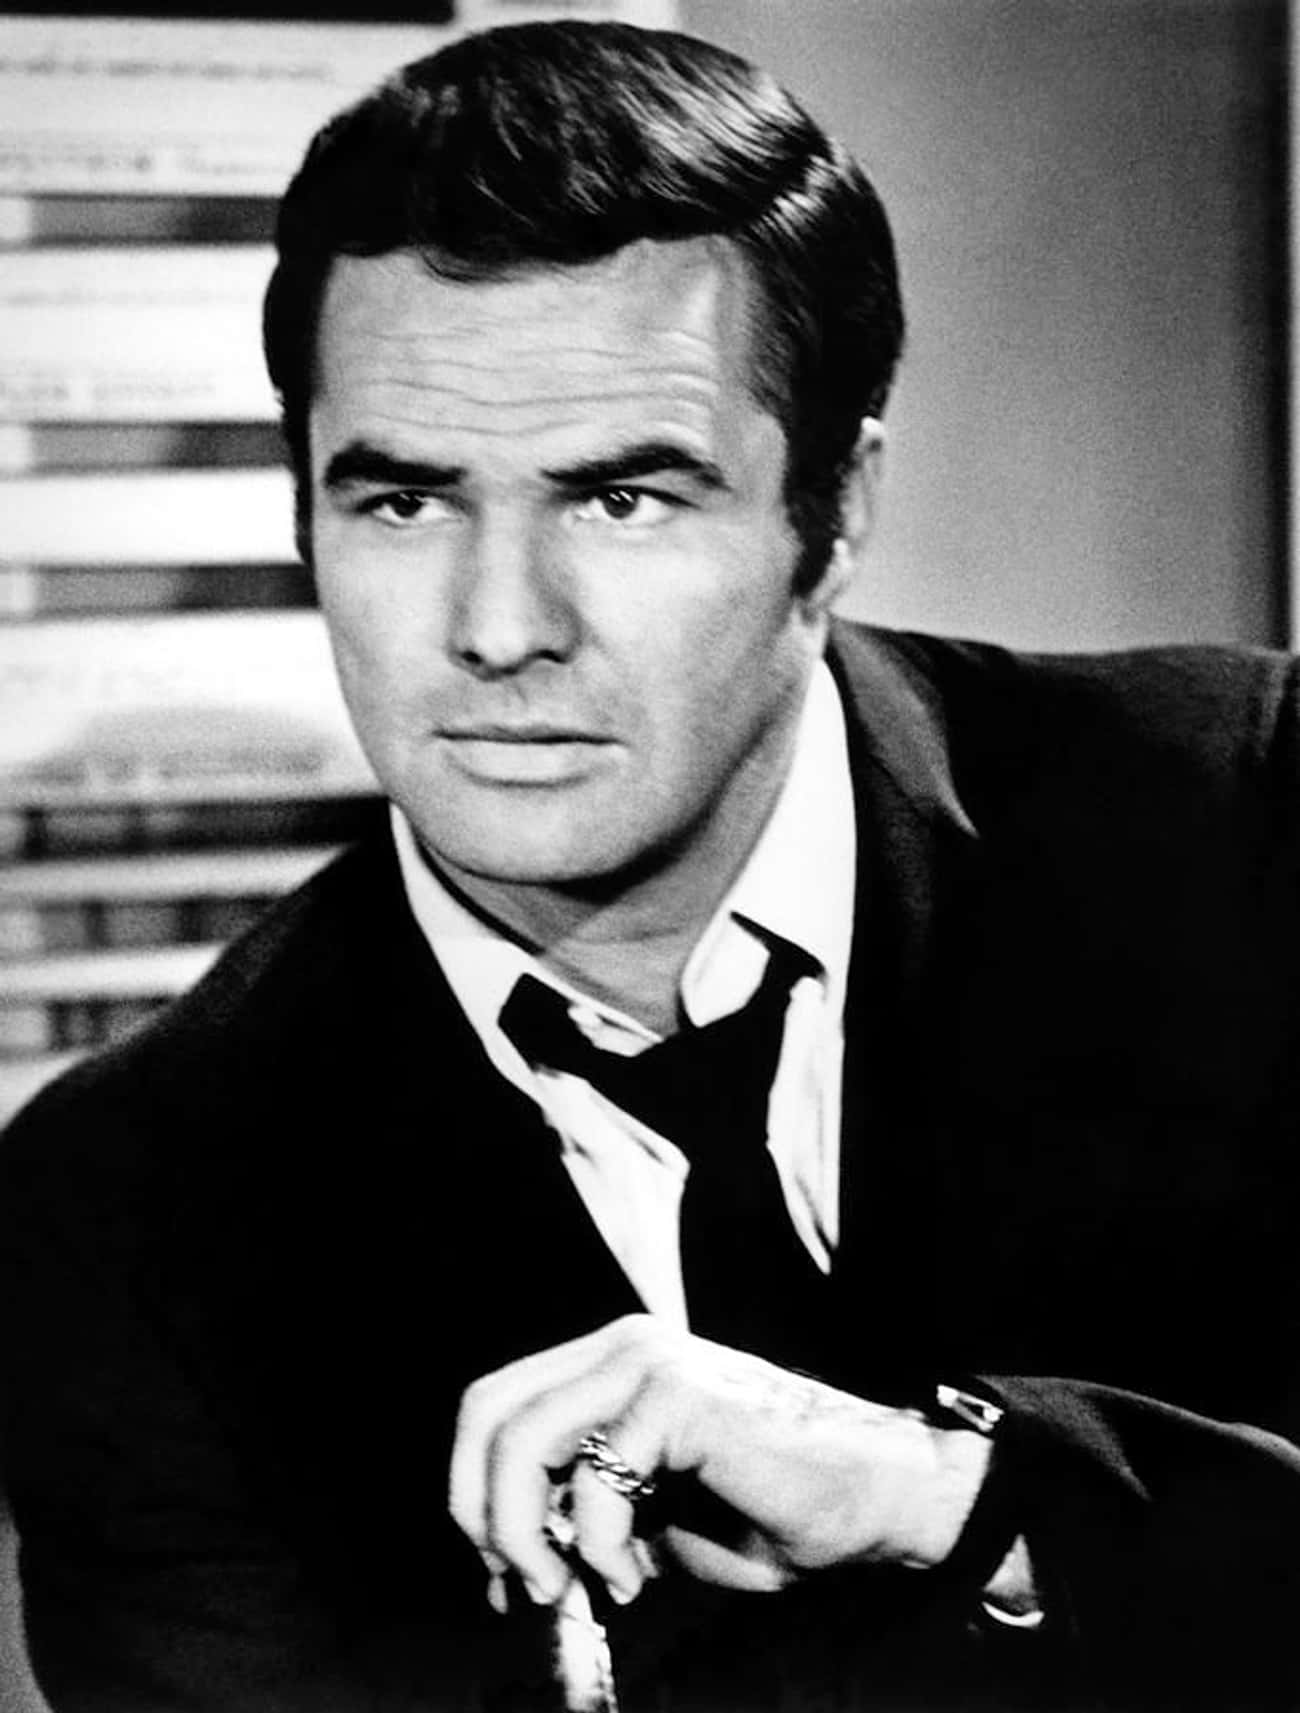 Young Burt Reynolds in a Black Sportscoat and Tie